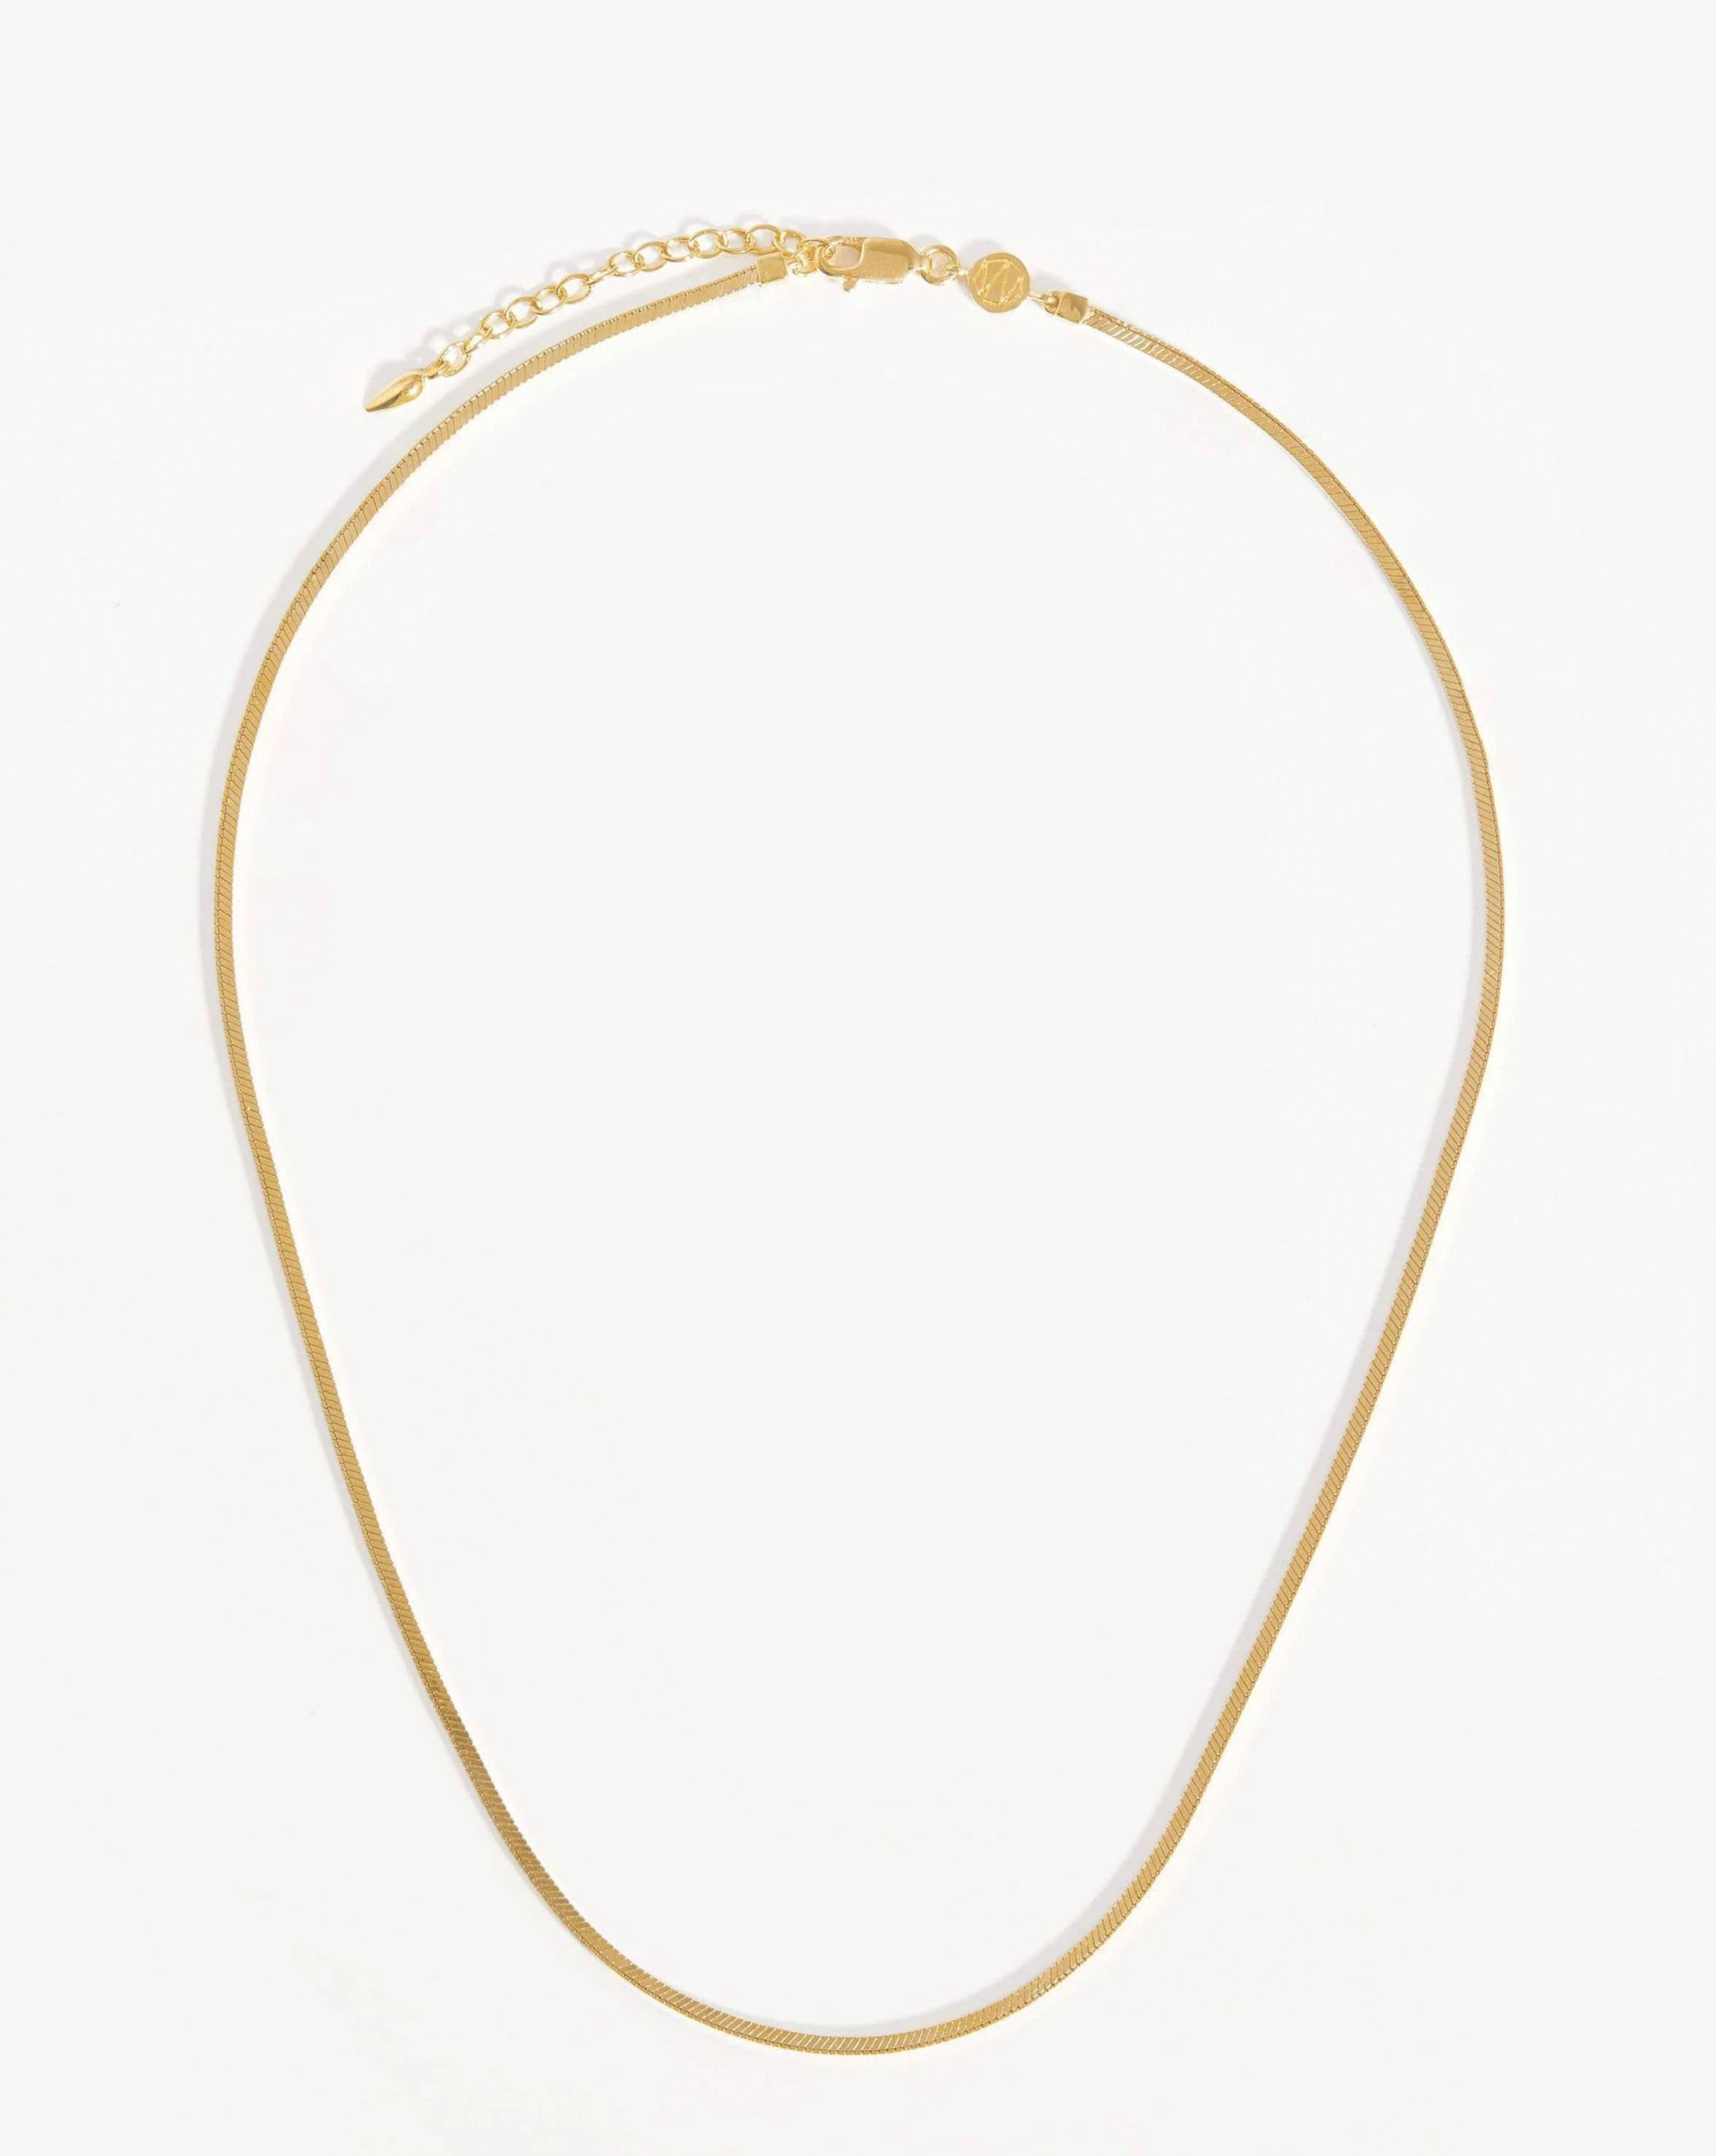 Lucy Williams Short Square Snake Chain Necklace | MIssoma UK